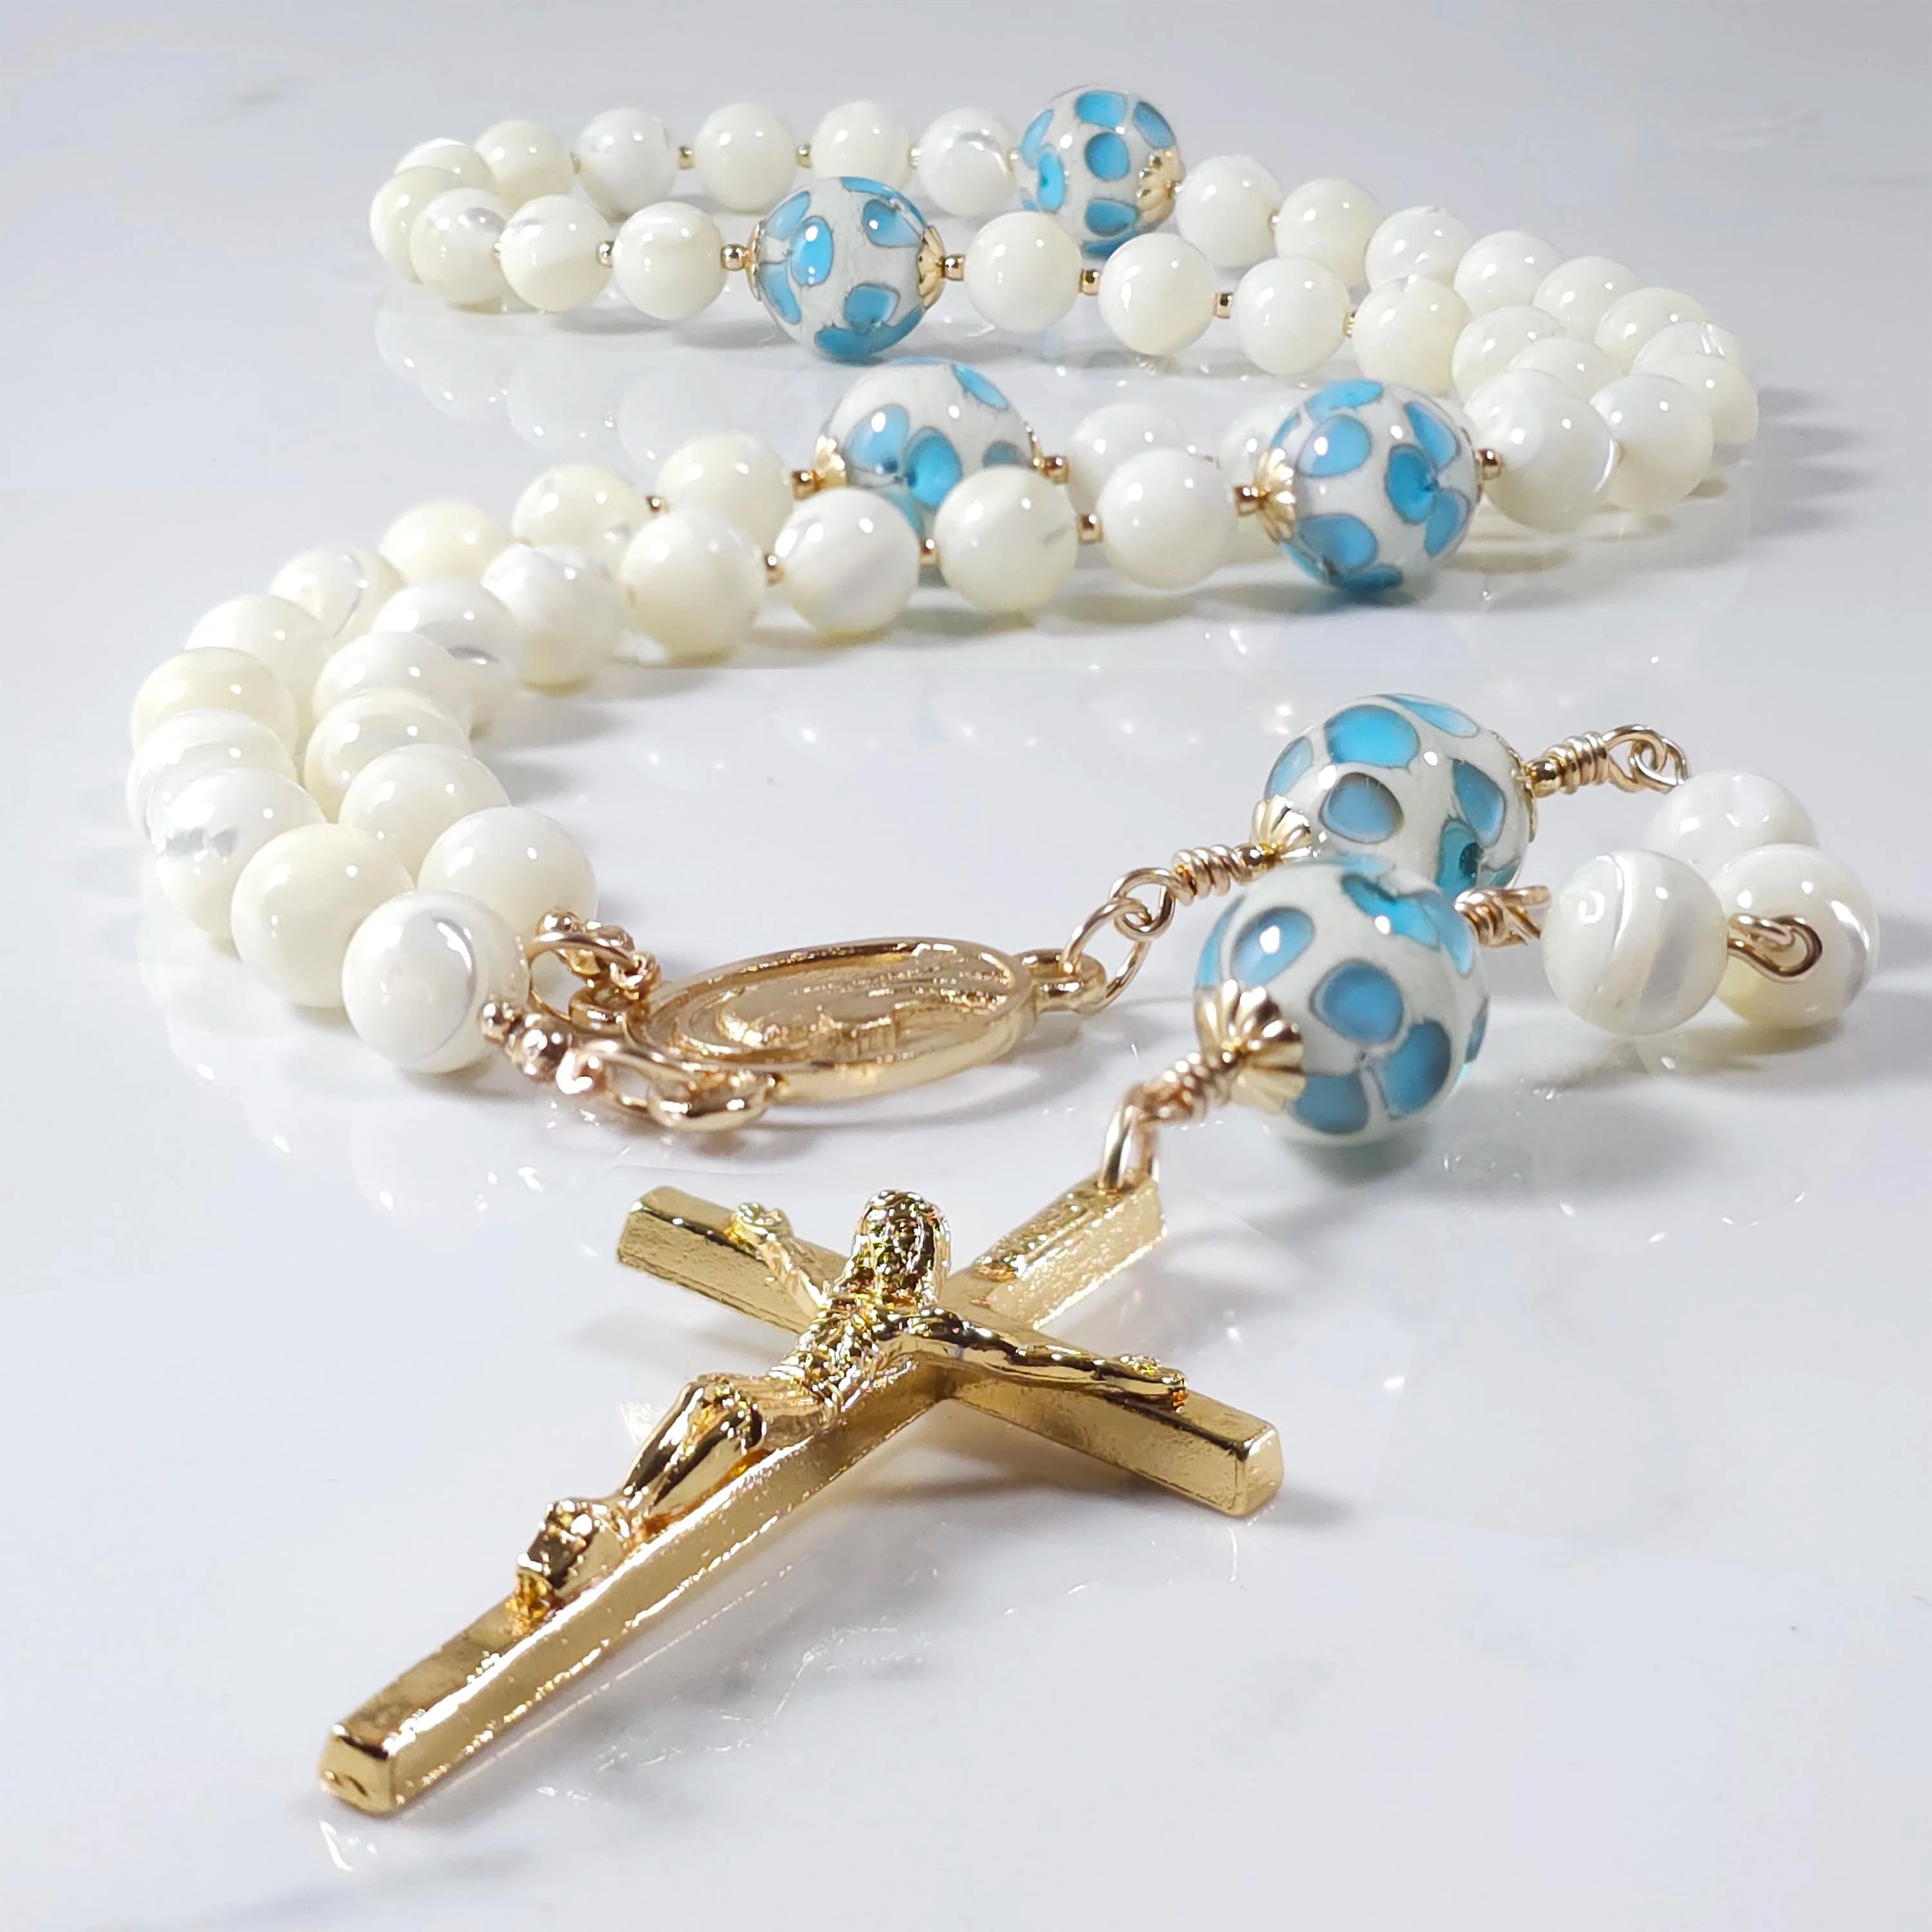 Our Lady of Lourdes Rosary necklace.